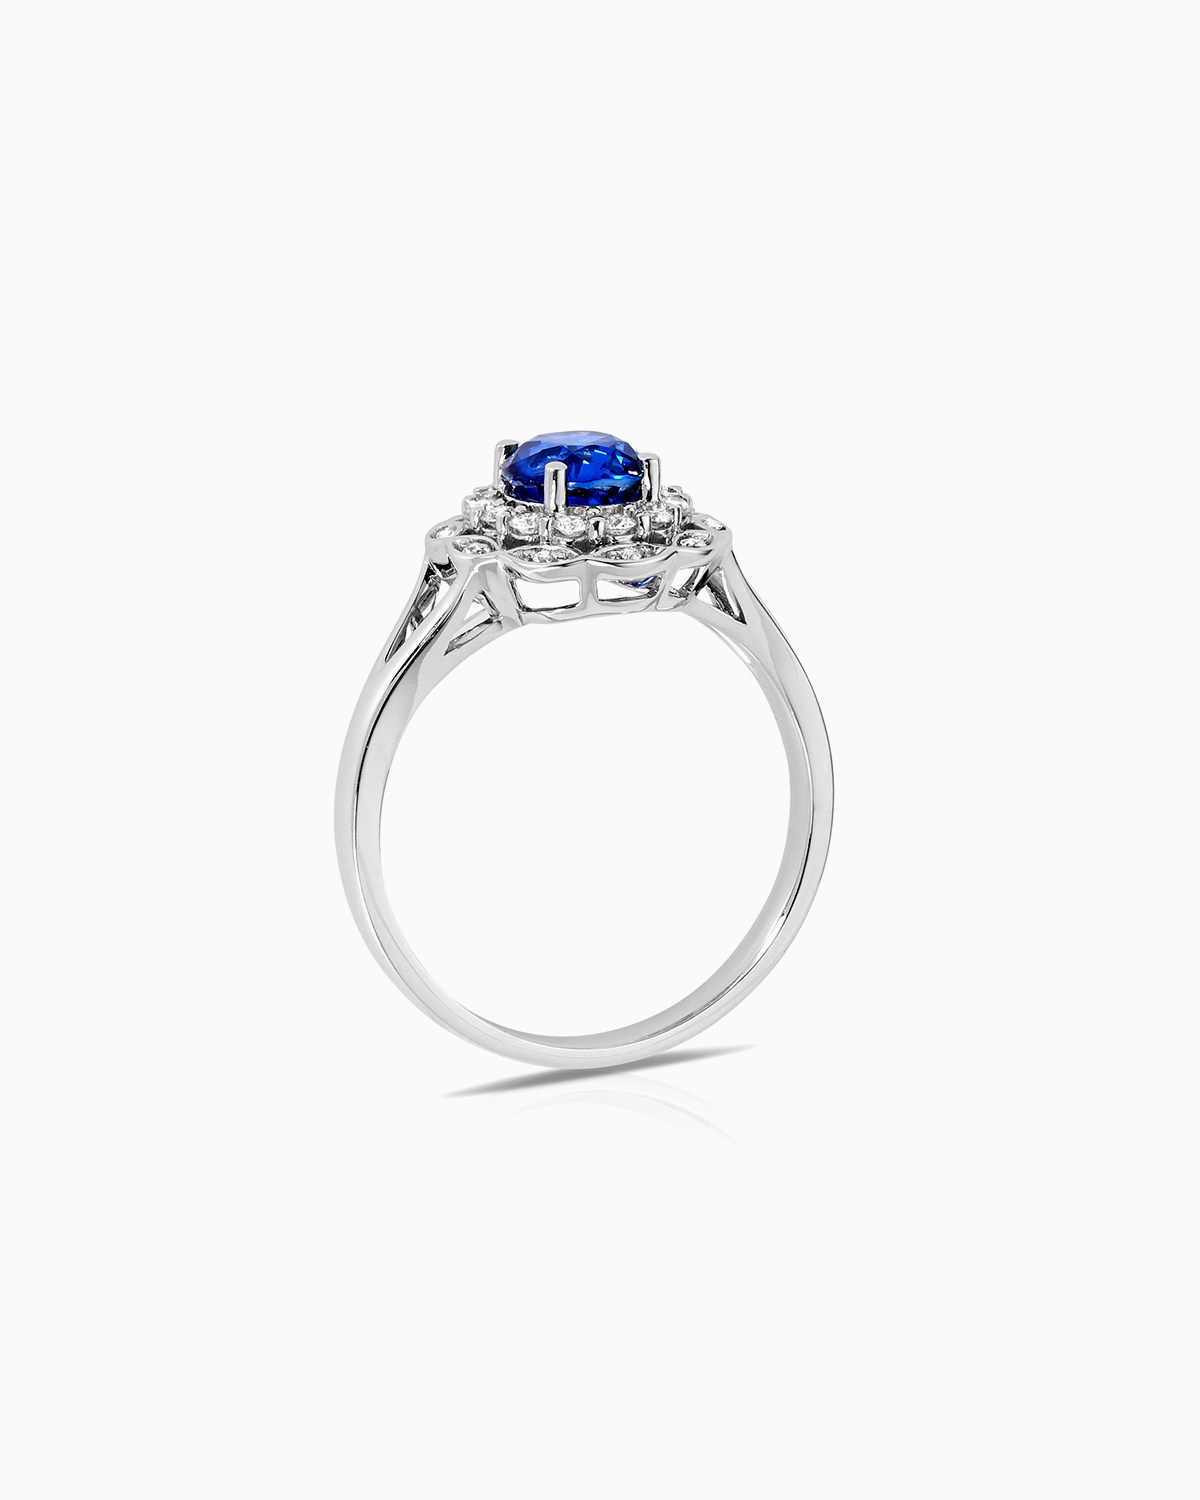 1.38ct Blue sapphire and diamond ring set in 18 karat white gold by claude and me jewellery.